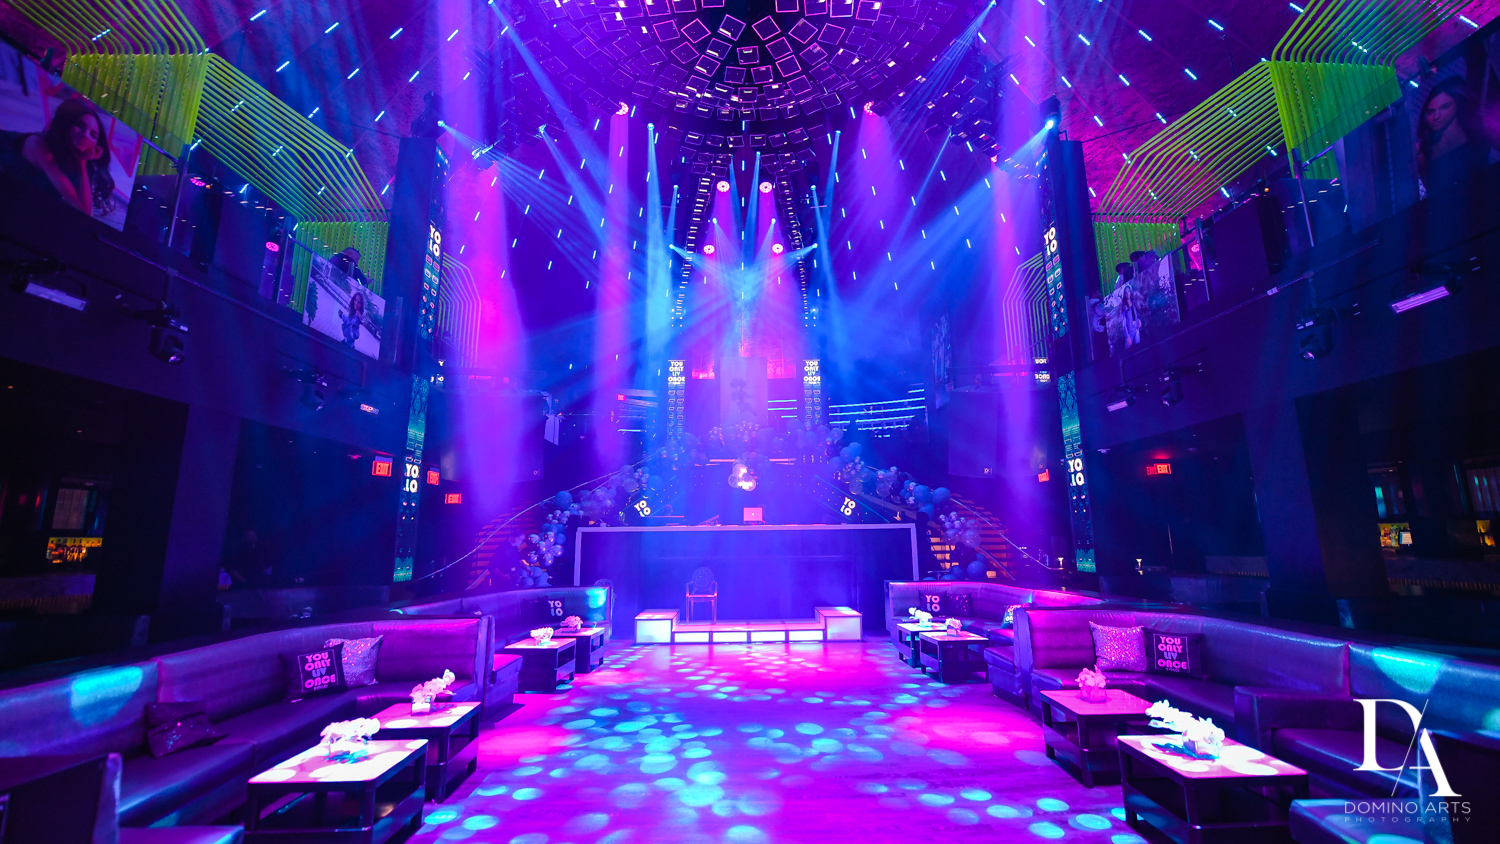 best decor at Nightclub Bat Mitzvah at LIV in Fontainebleau Miami by Domino Arts Photography